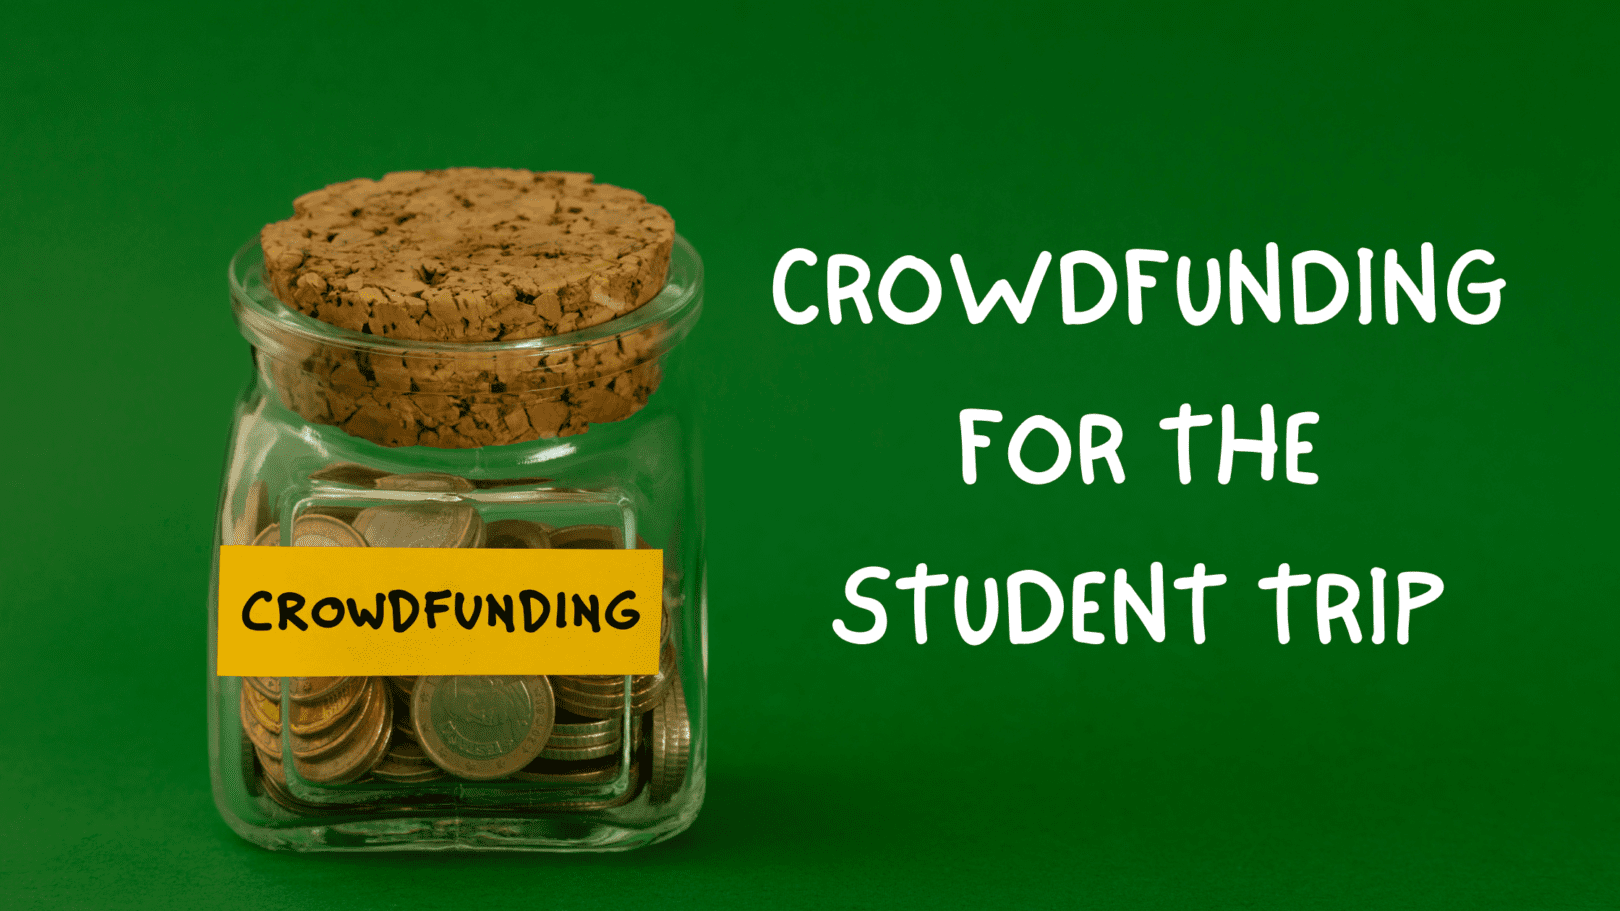 Crowdfunding for the student trip